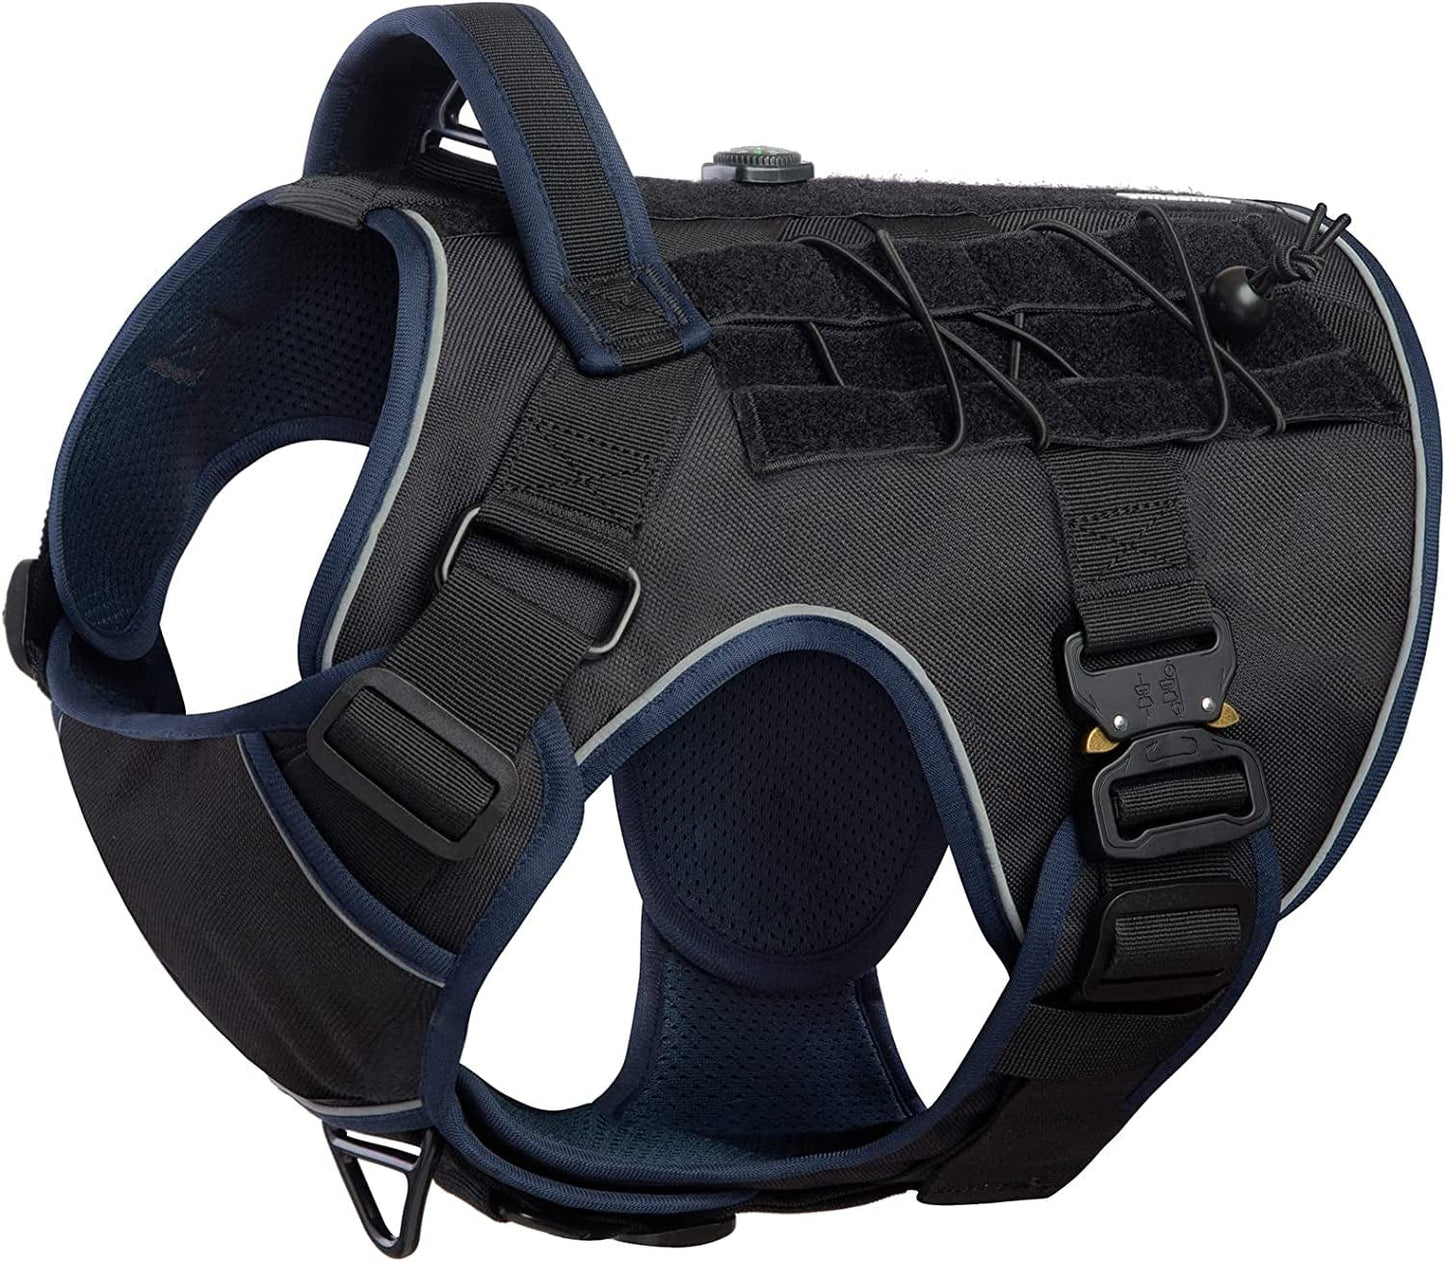 DNALLRINO Tactical Dog Harness for Large Medium Dogs, Heavy Duty Military Dog Harness with Handle, Adjustable No Pull Service Dog Harness with Molle & Loop Panels for Hiking Walking Training Animals & Pet Supplies > Pet Supplies > Dog Supplies > Dog Apparel Dnallrino Black L (Neck: 19" - 27", Chest: 28.5"-37") 